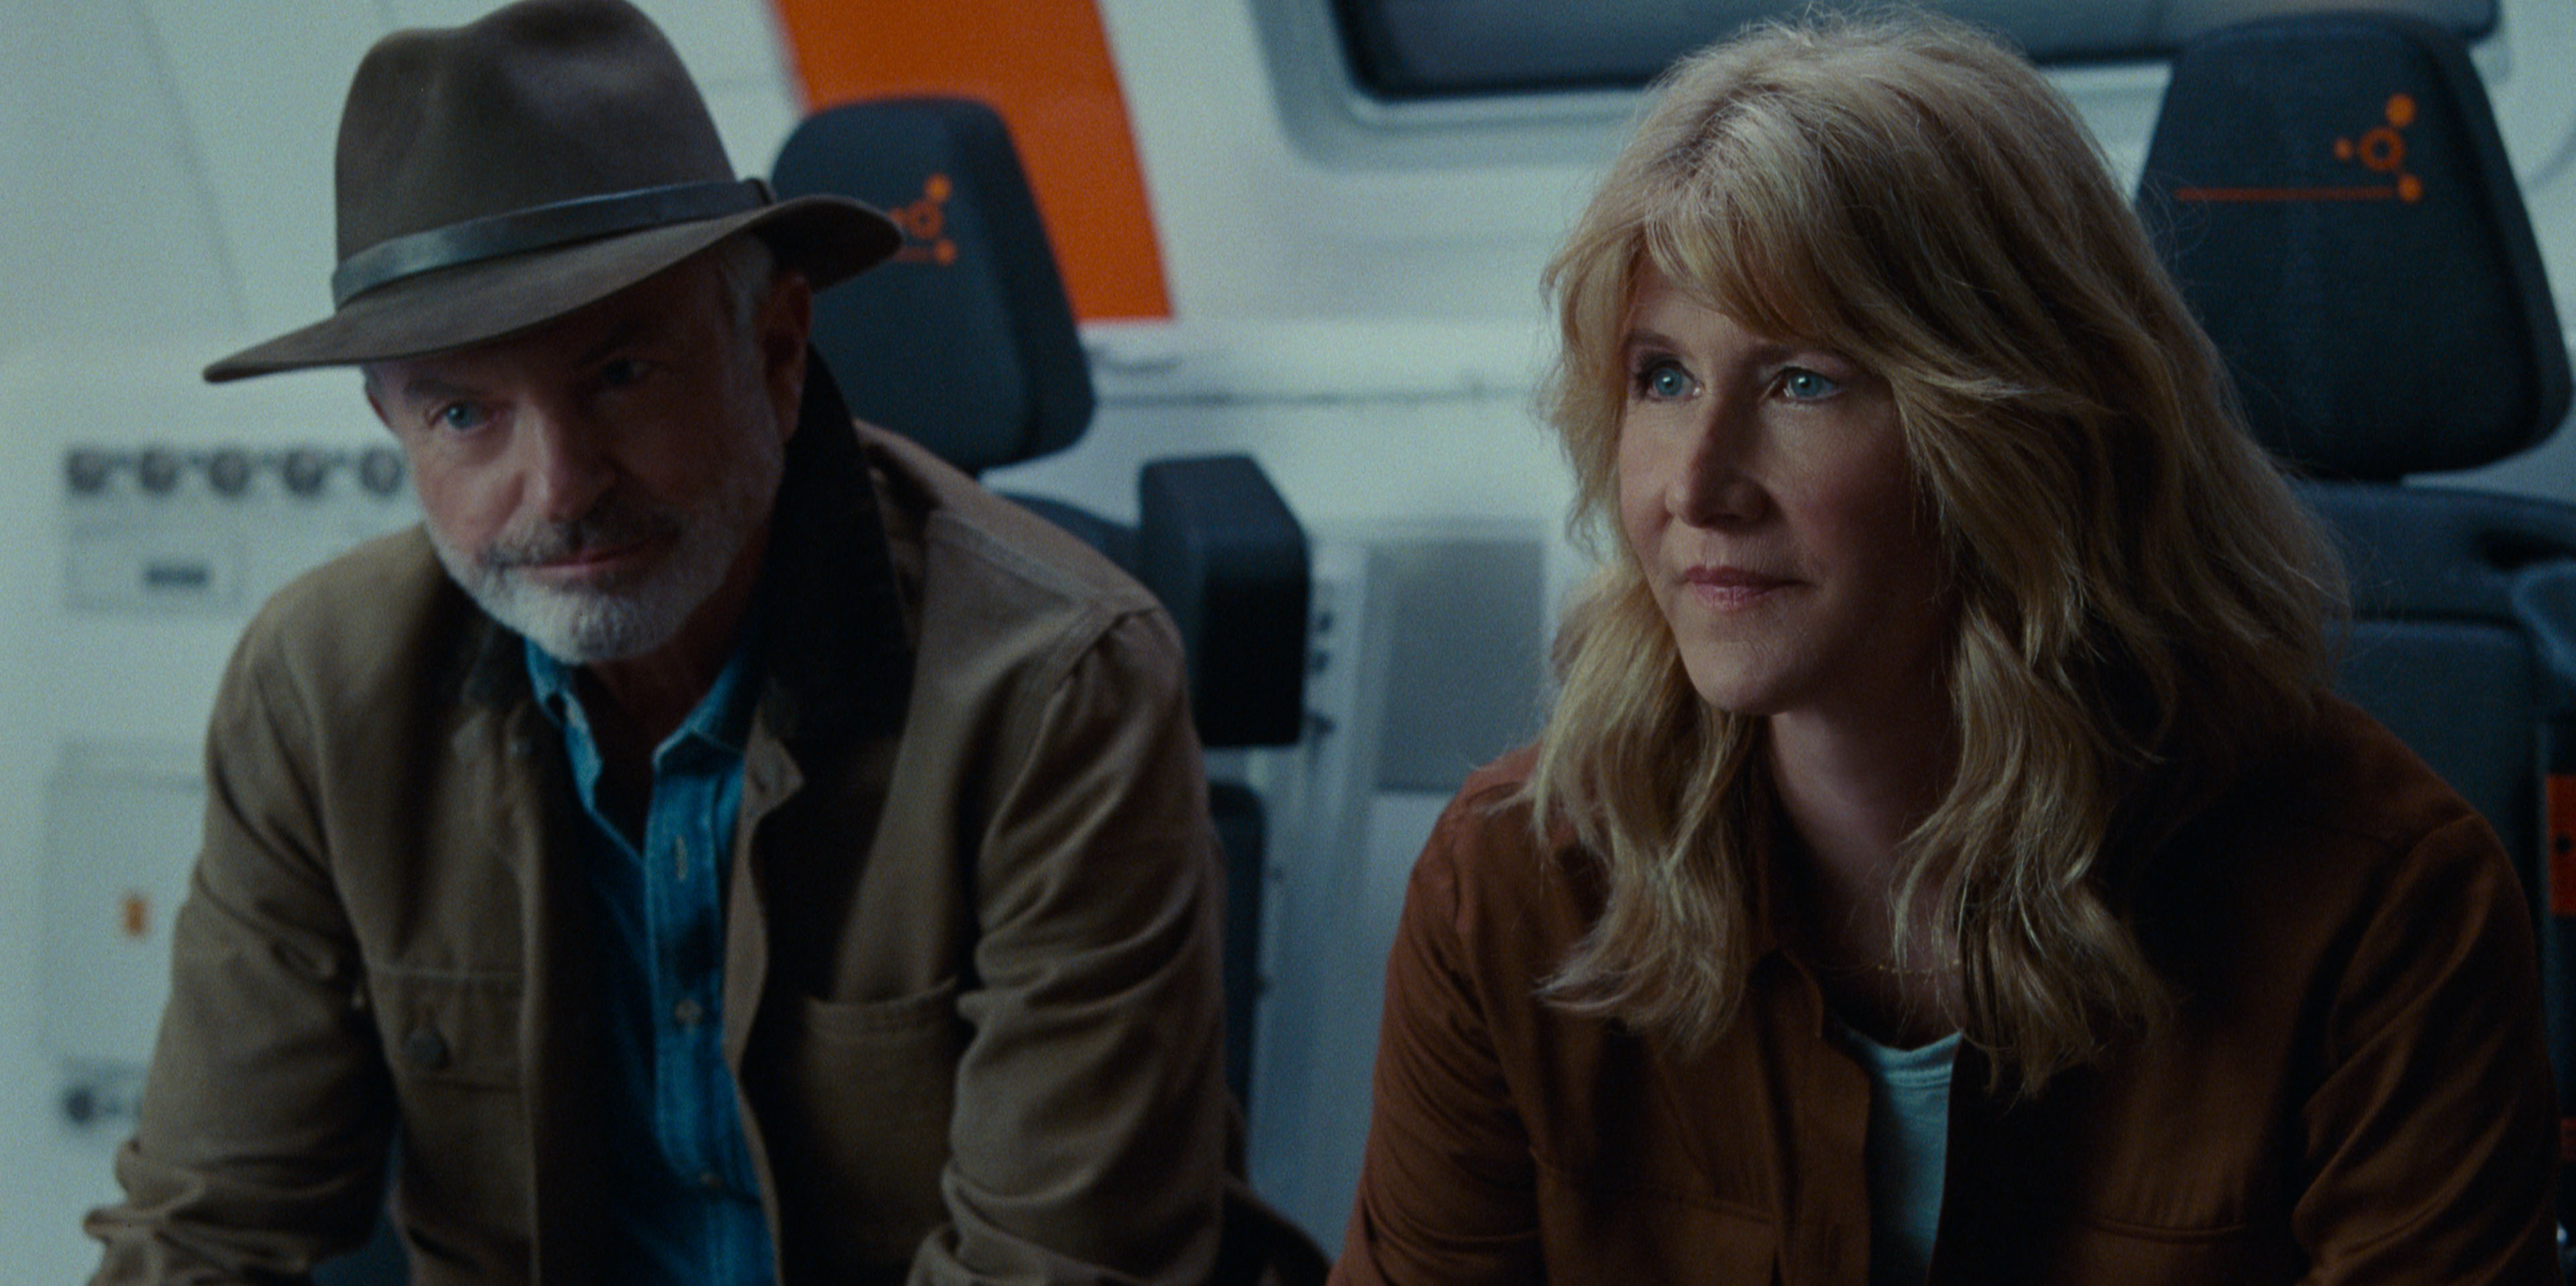 Dr. Alan Grant (Sam Neill) and Dr. Ellie Sattler (Laura Dern) in Jurassic World Dominion (Universal Pictures and Amblin Entertainment)